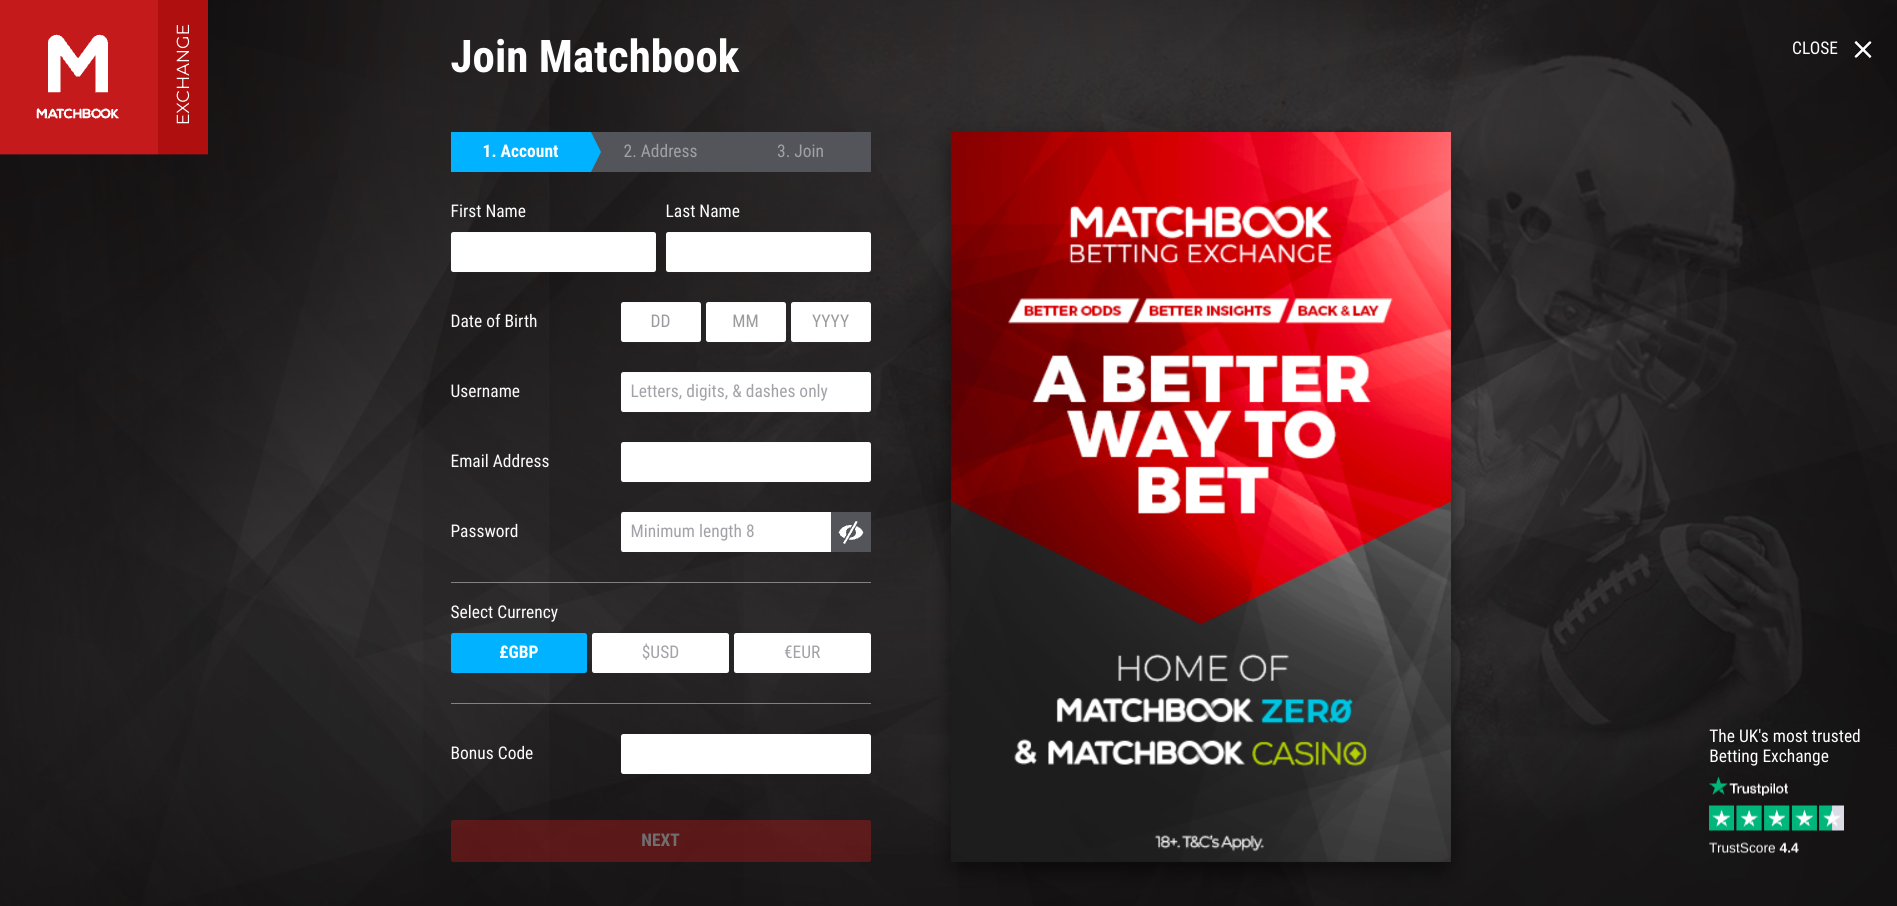 How to claim Matchbook offers